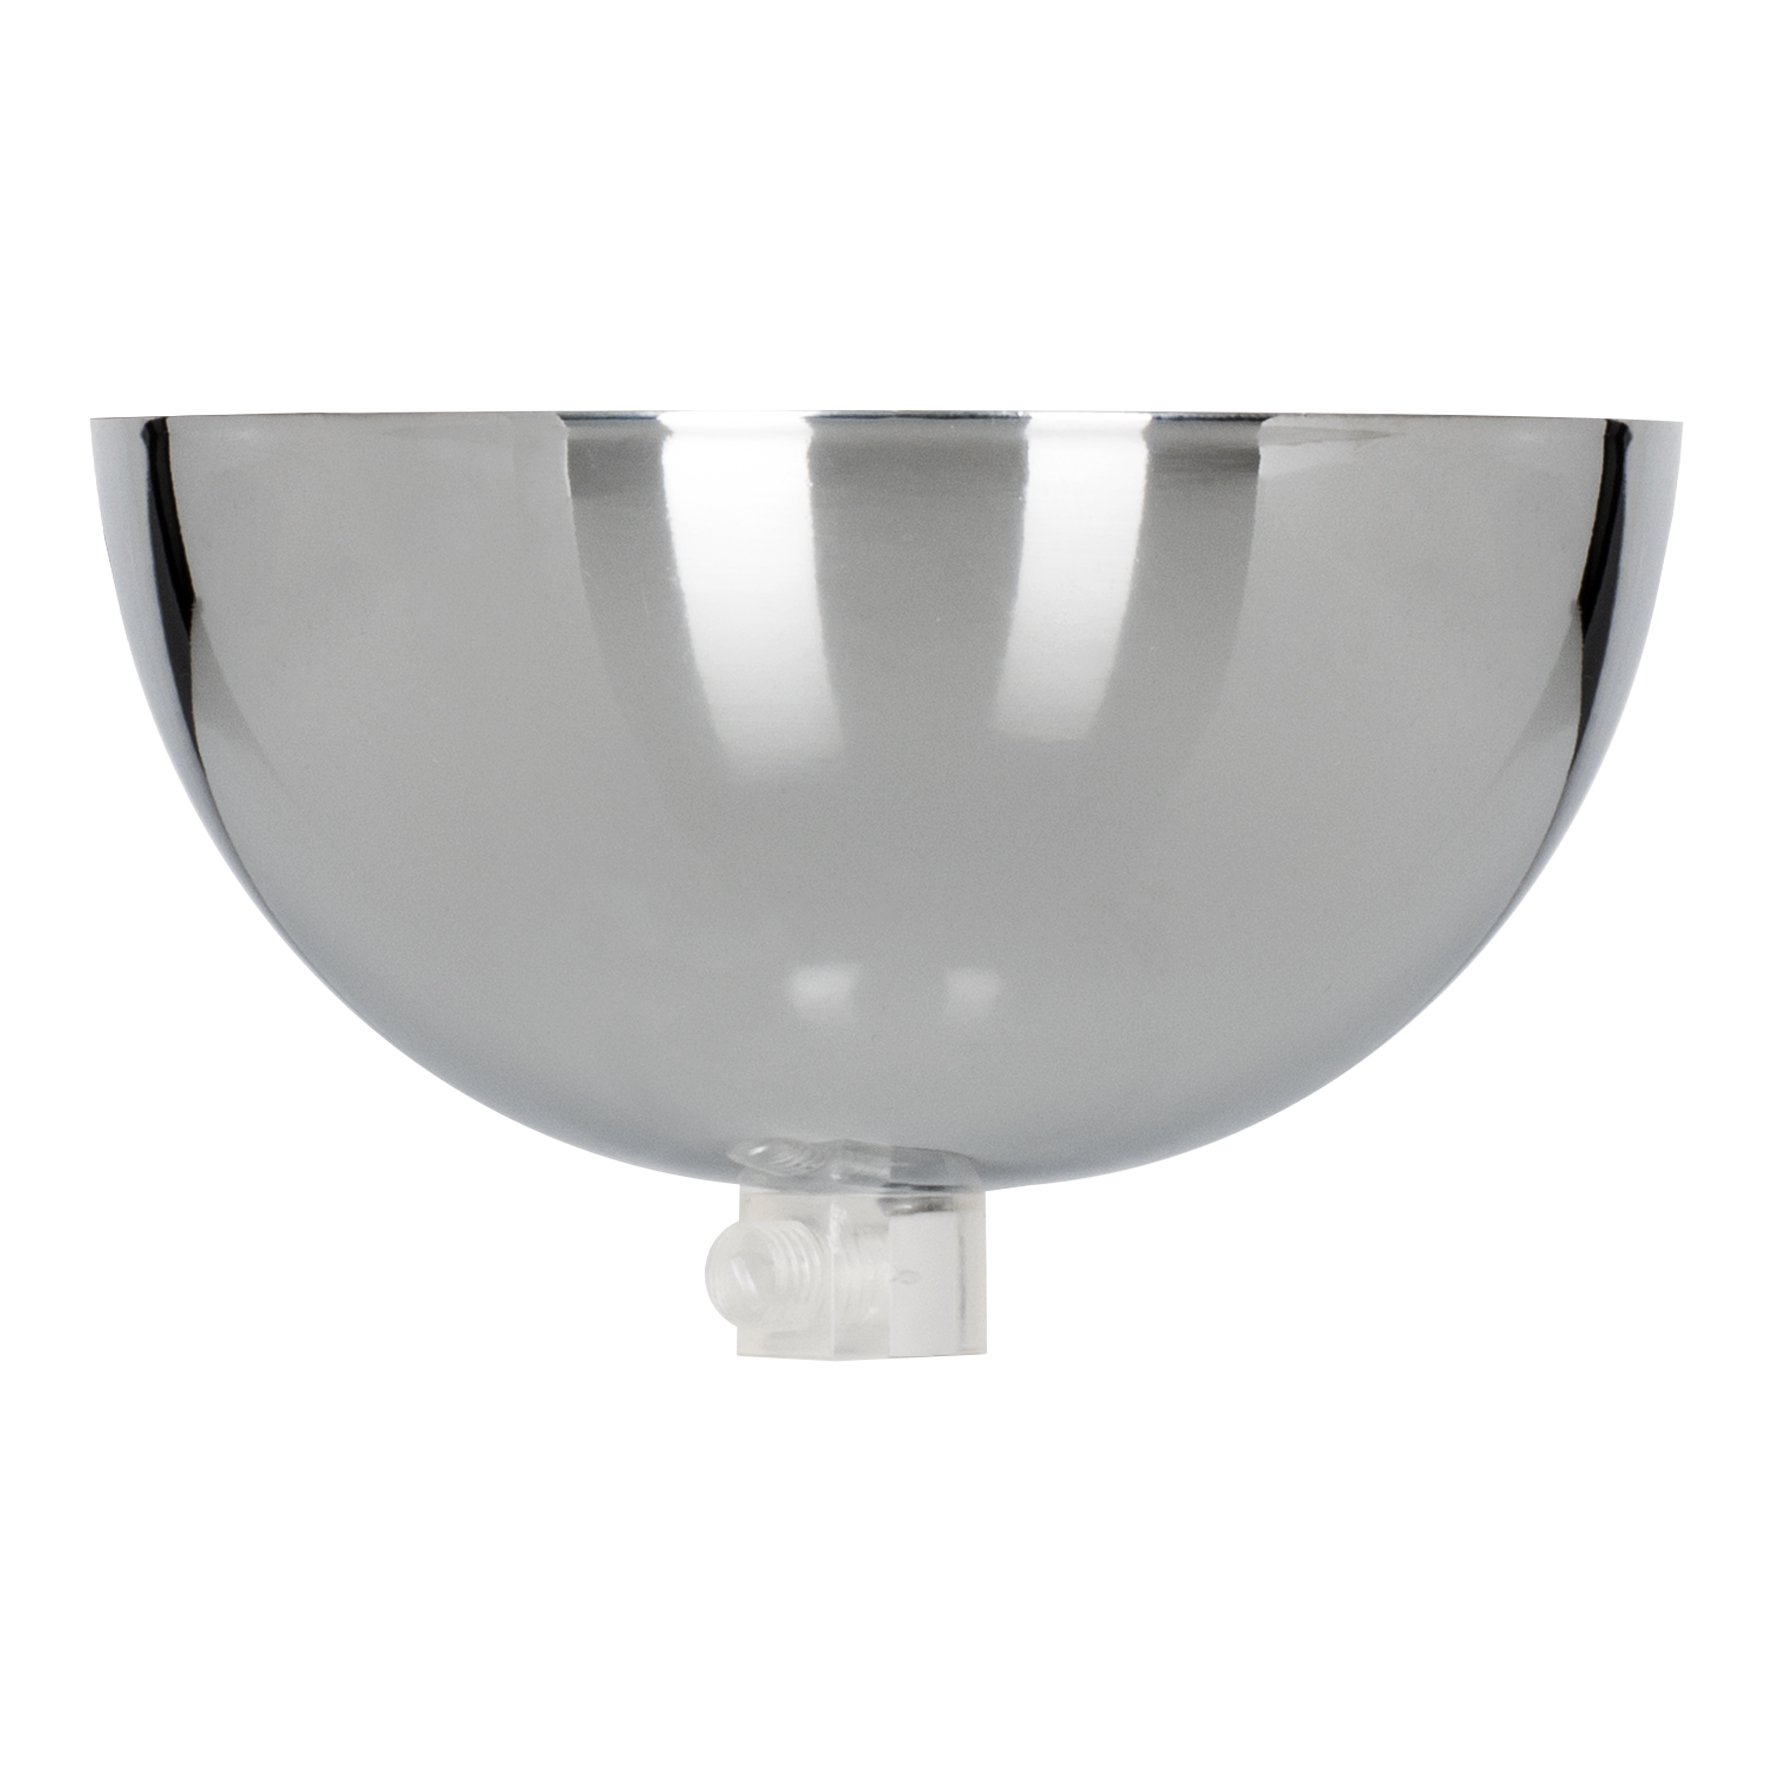 Ceiling Cup Bowl Chrome